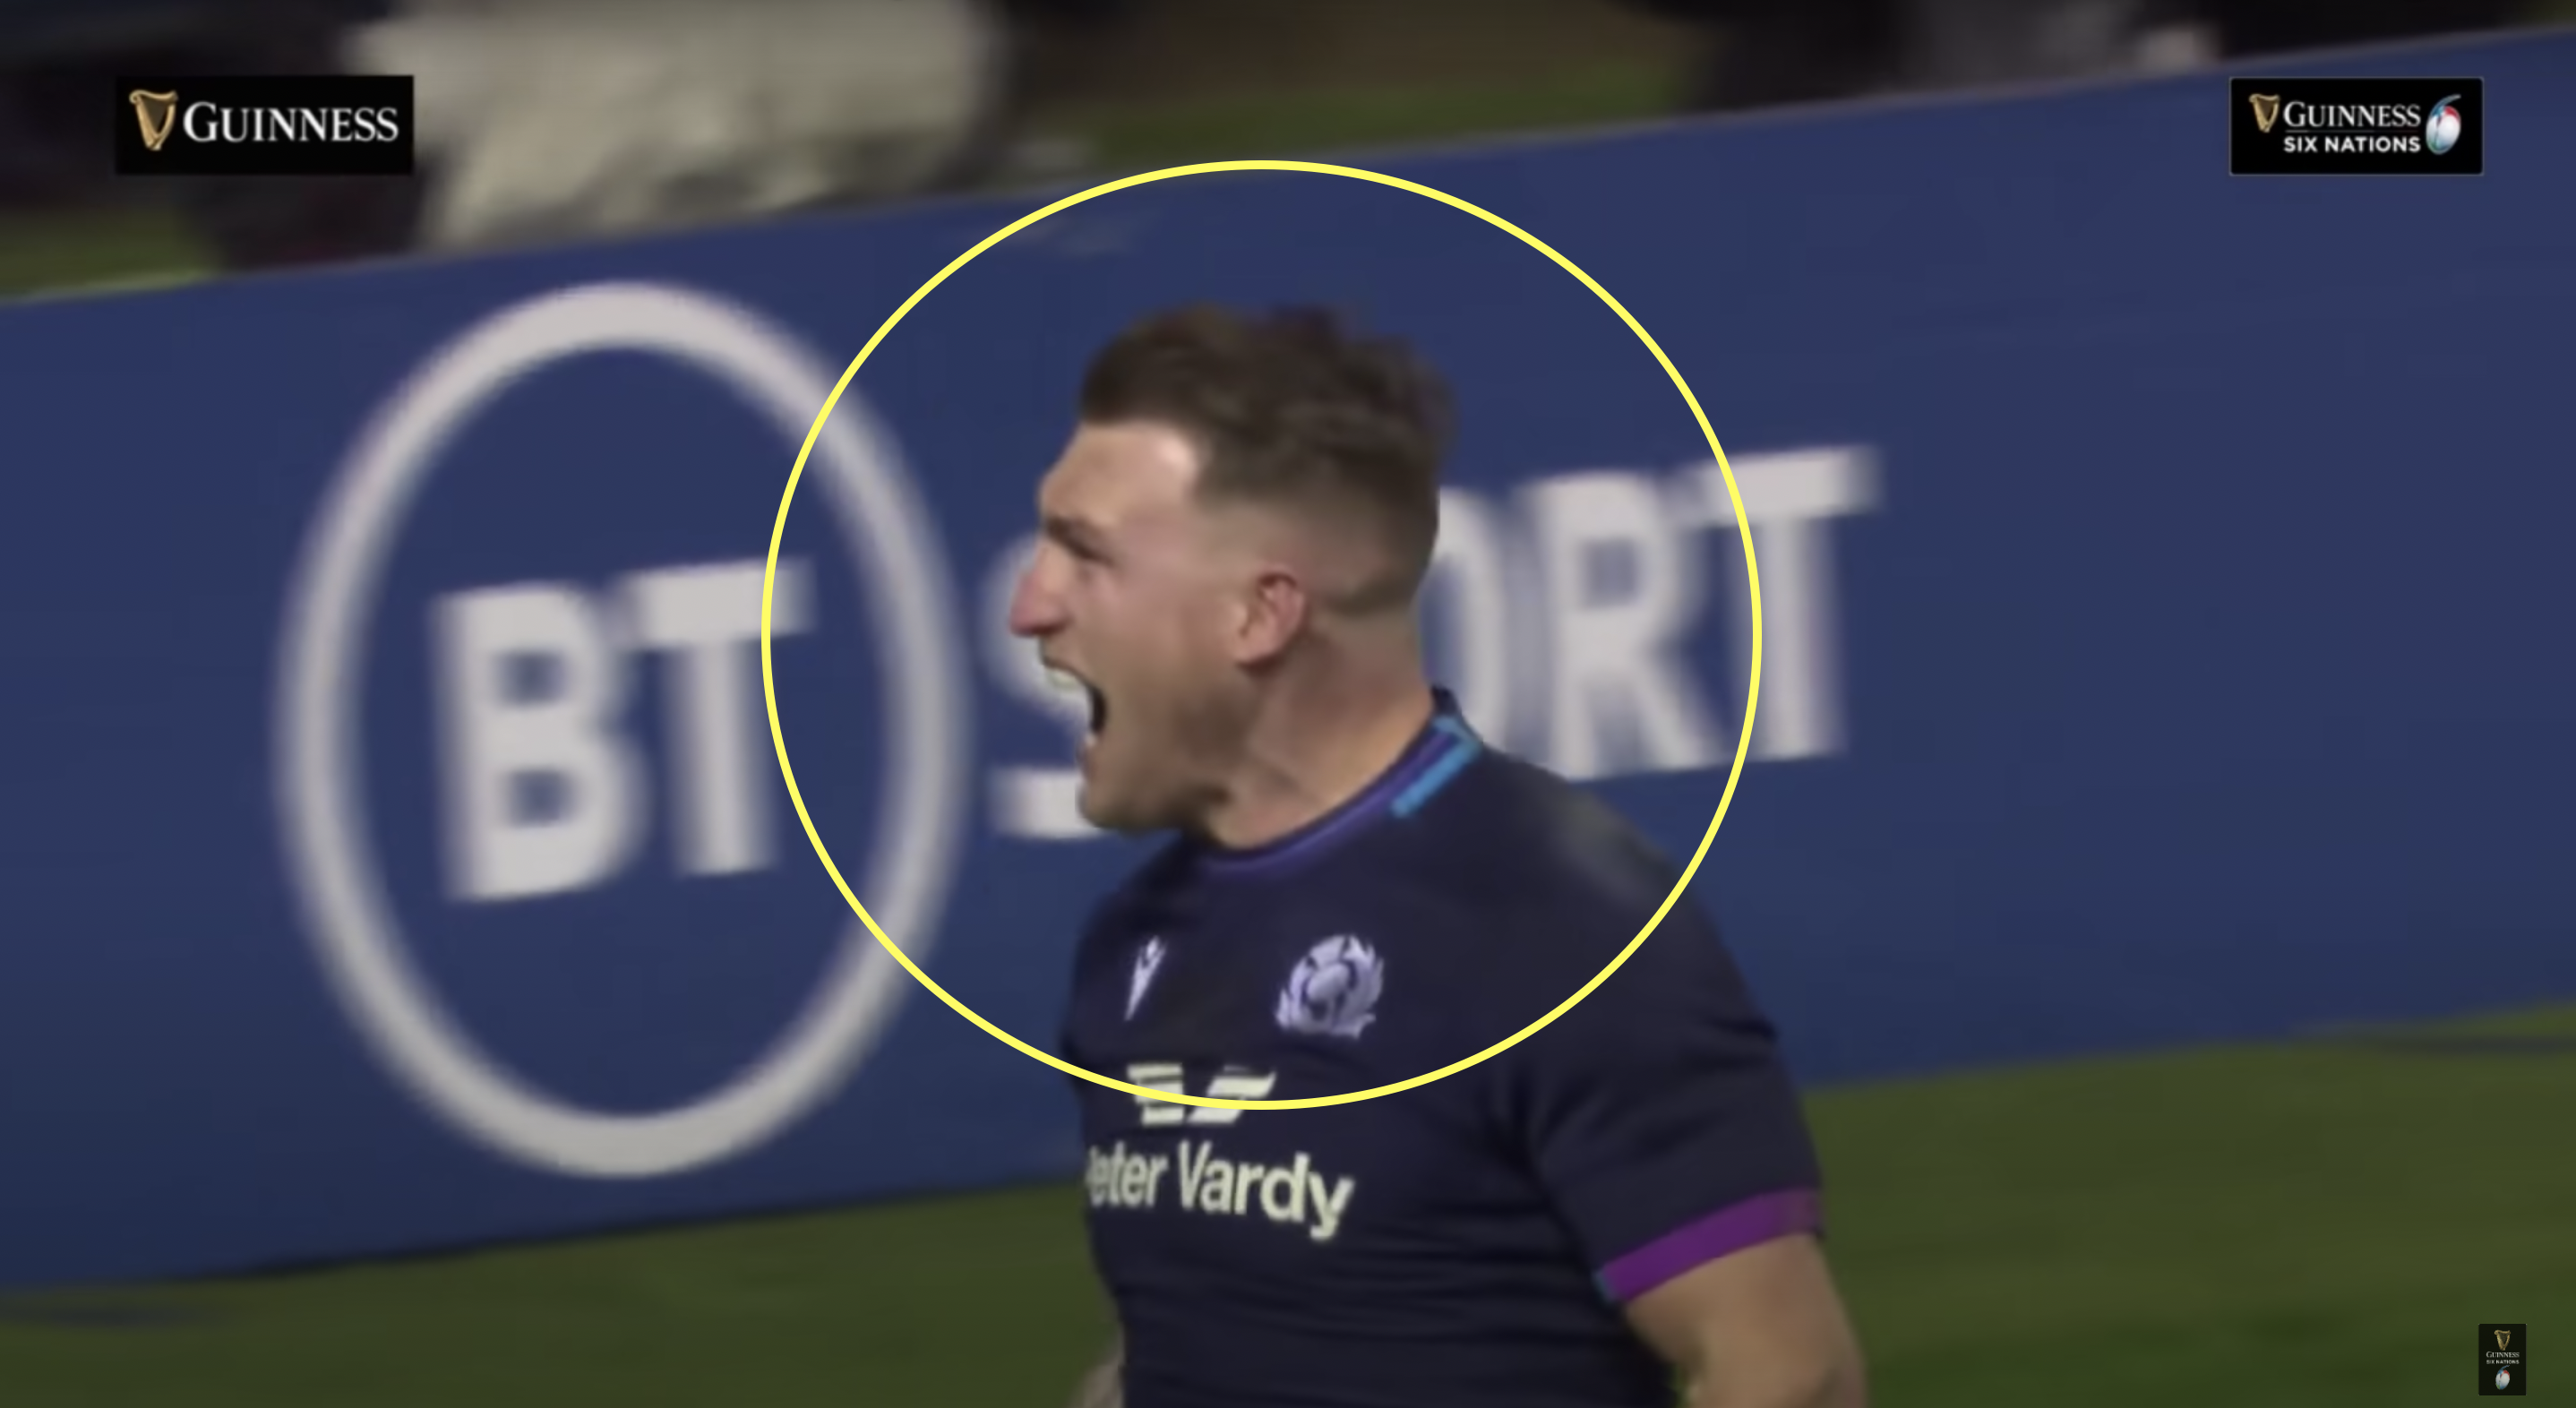 Stuart Hogg miraculously gets away with cheating with blatant yellow card offence